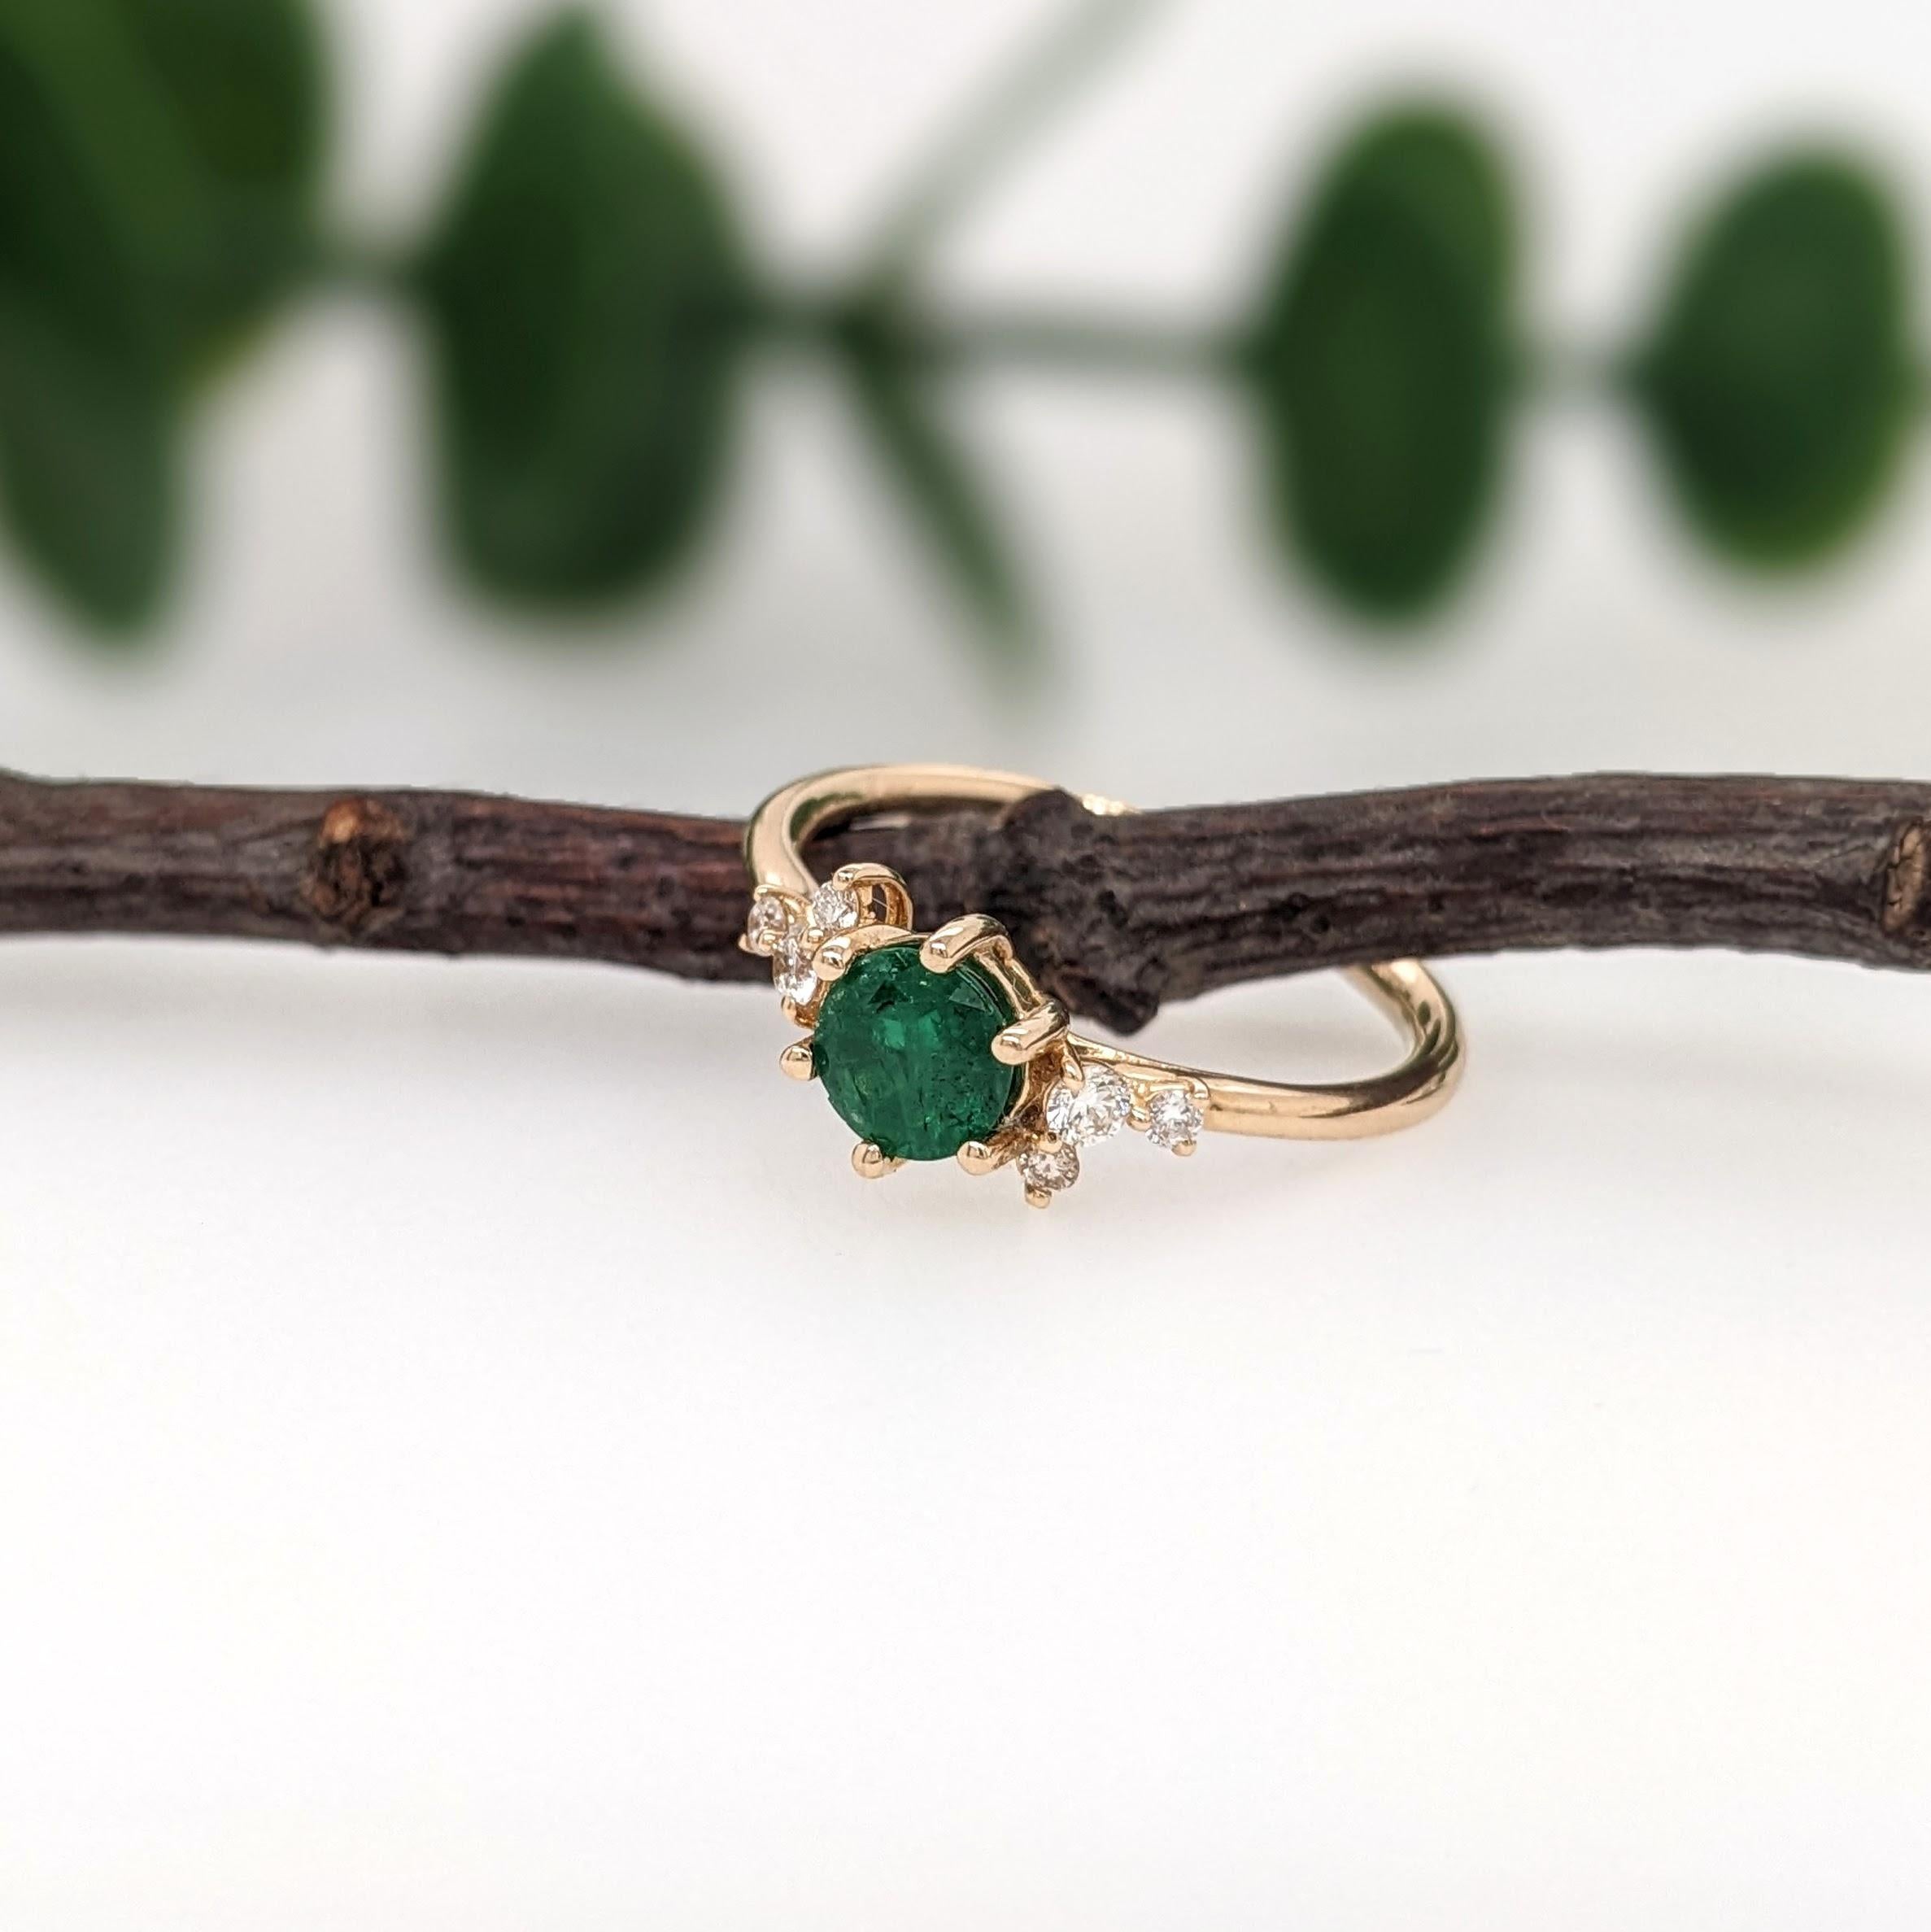 Modern Green Emerald Ring w Natural Diamonds in Solid 14k Yellow Gold Round 5mm